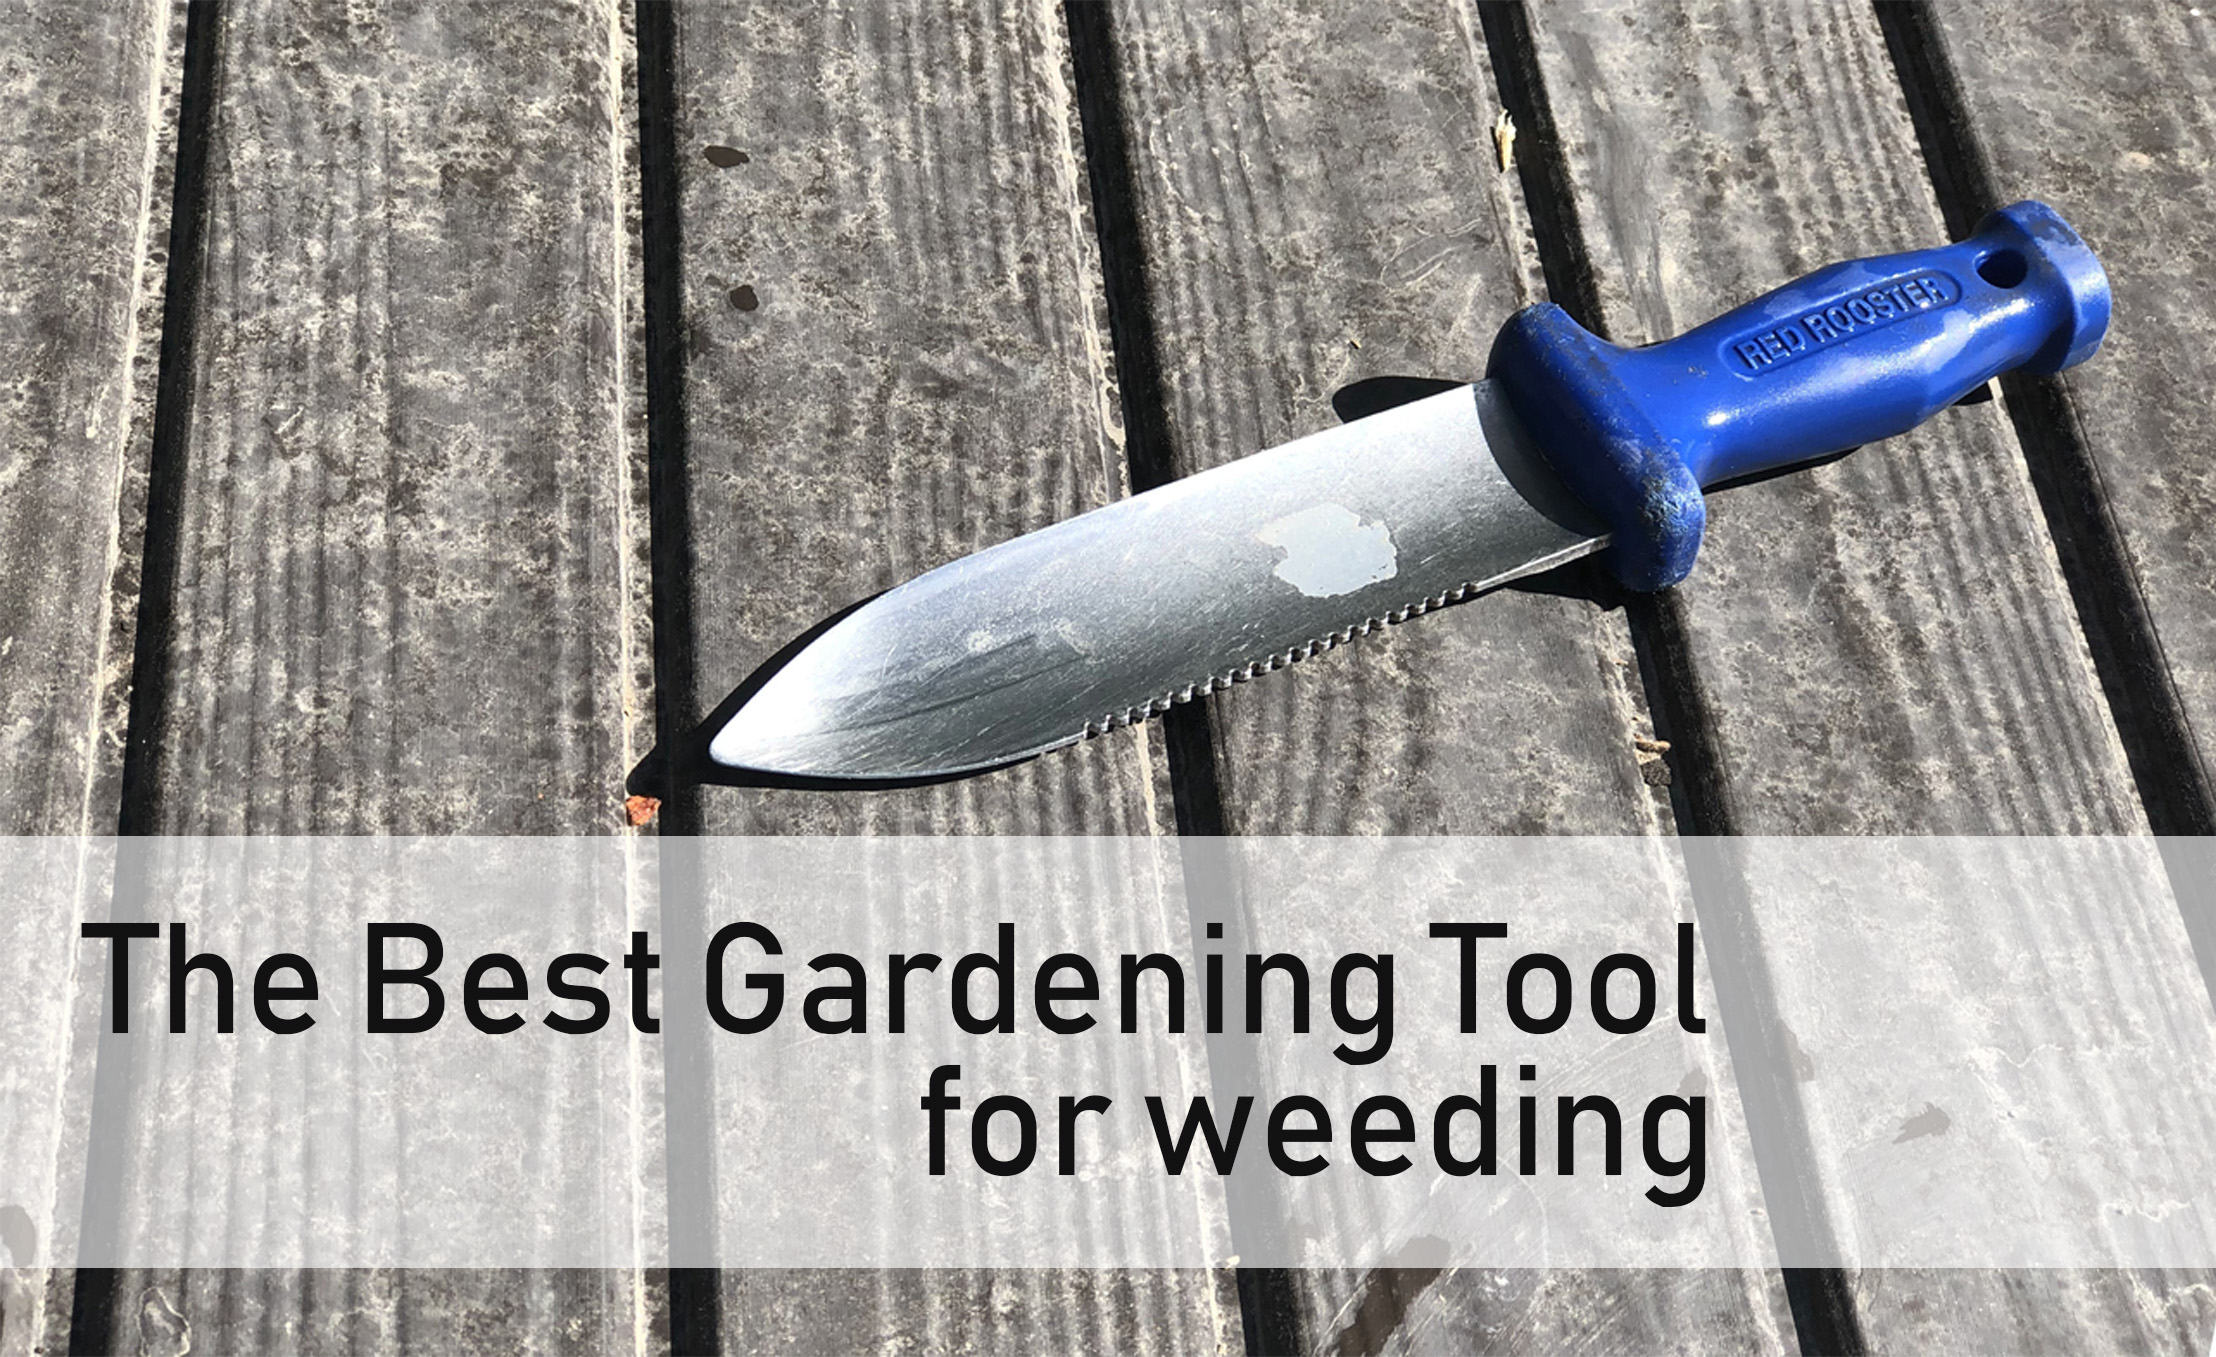 The Best gardening tool for weeding